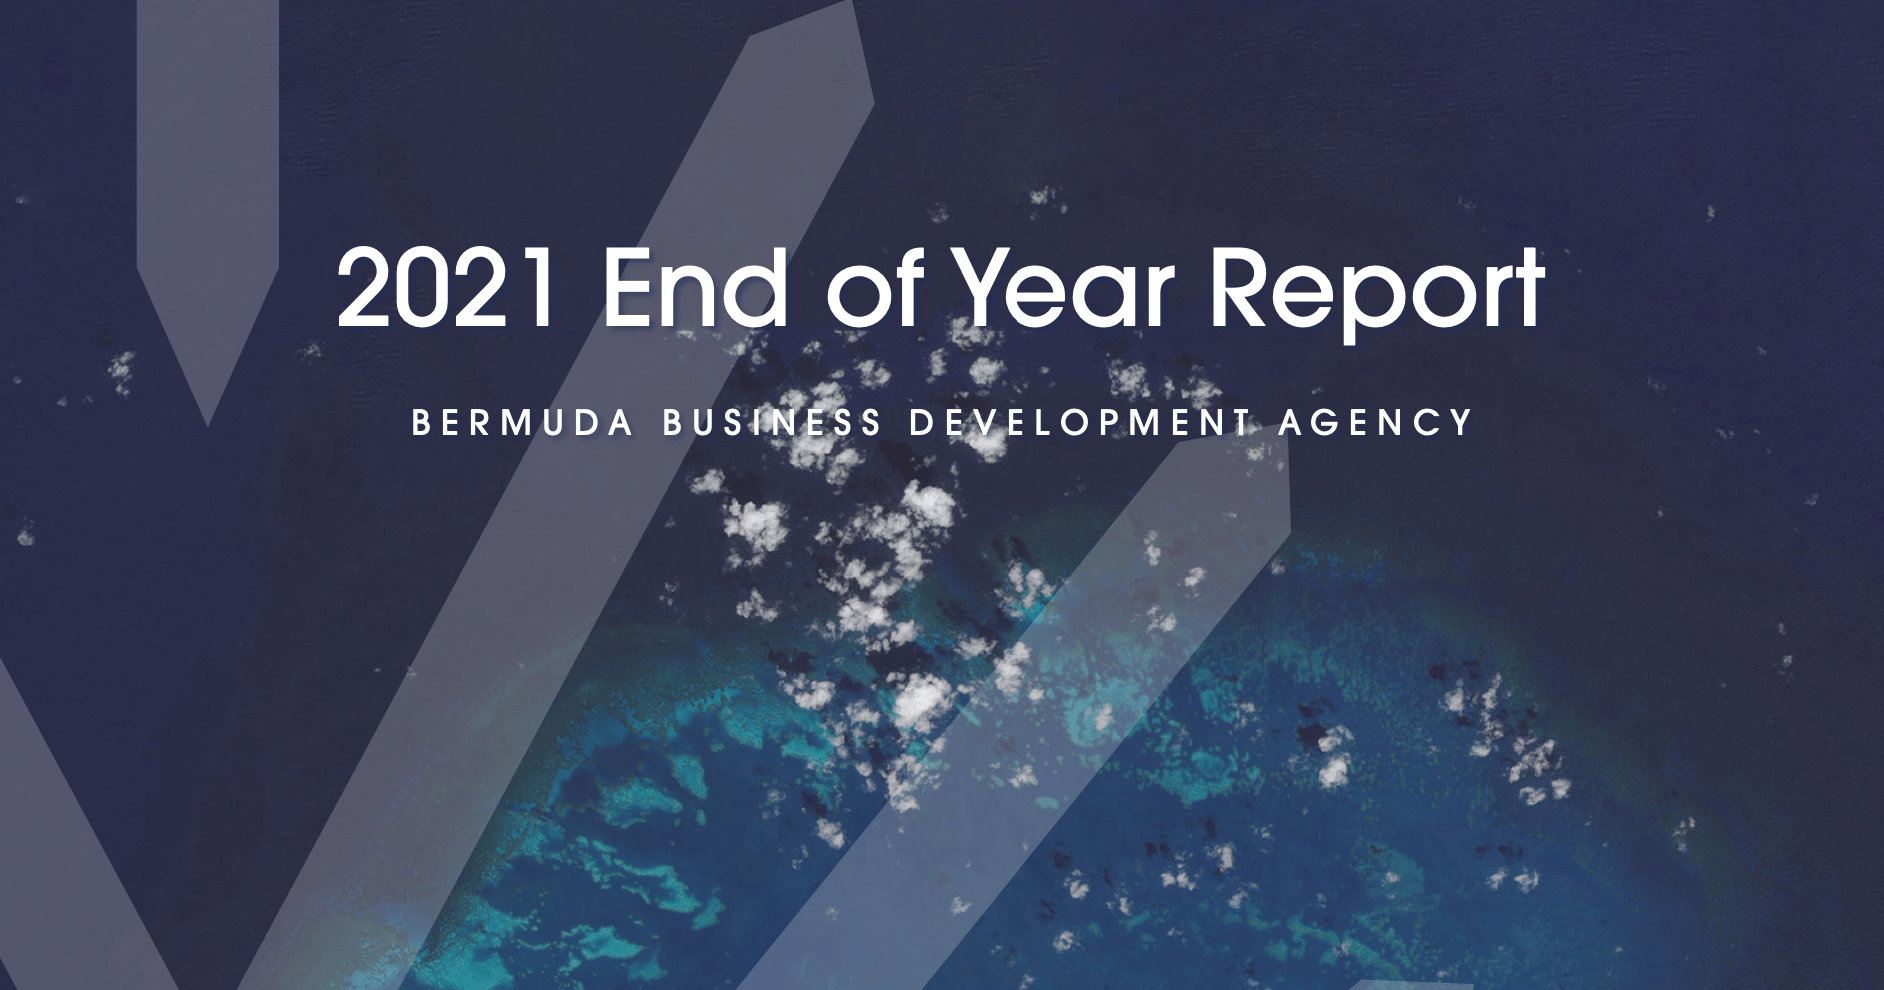 BDA Releases 2021 End of Year Report